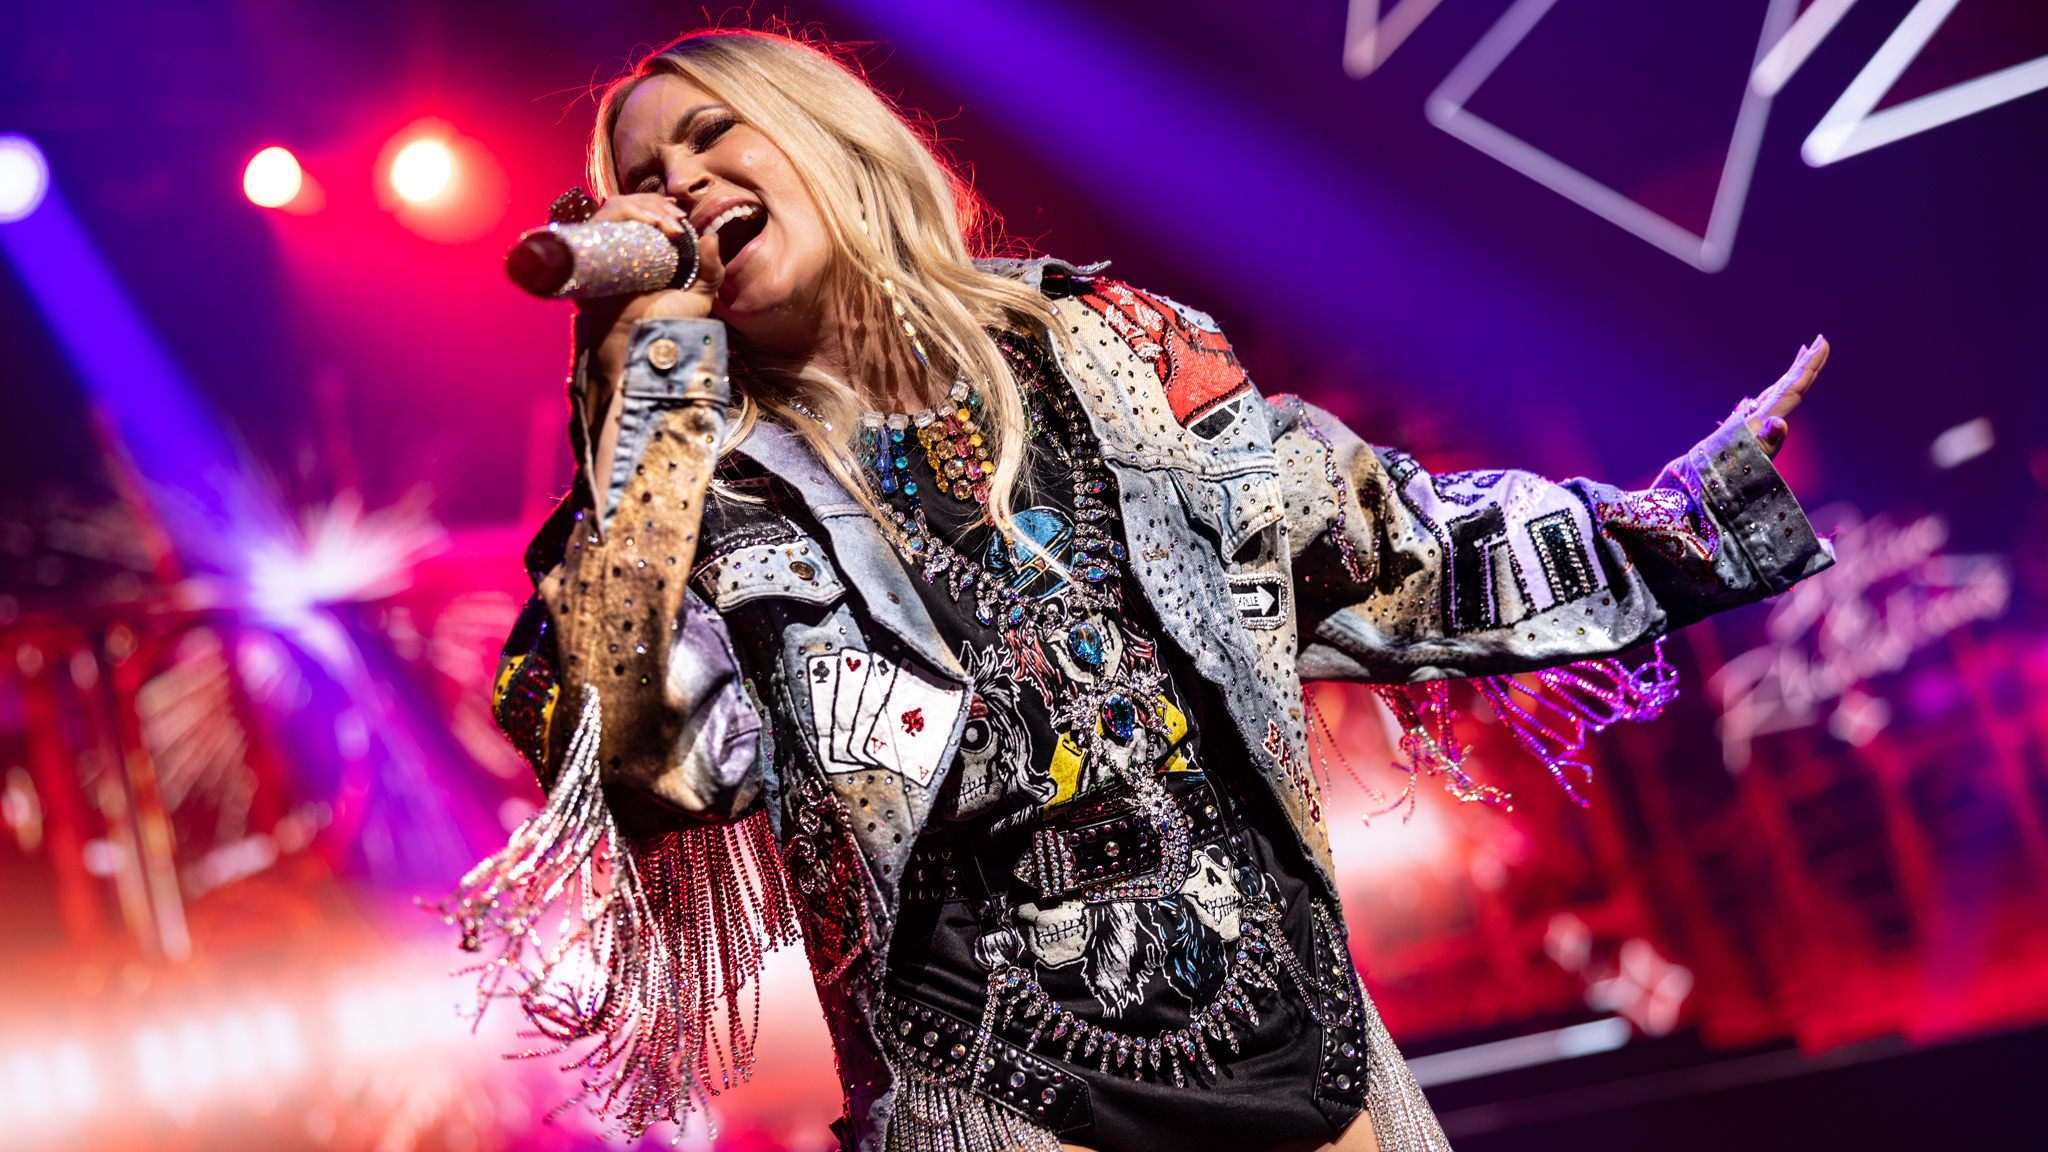 Guns N' Roses will be joined by Carrie Underwood and more on tour